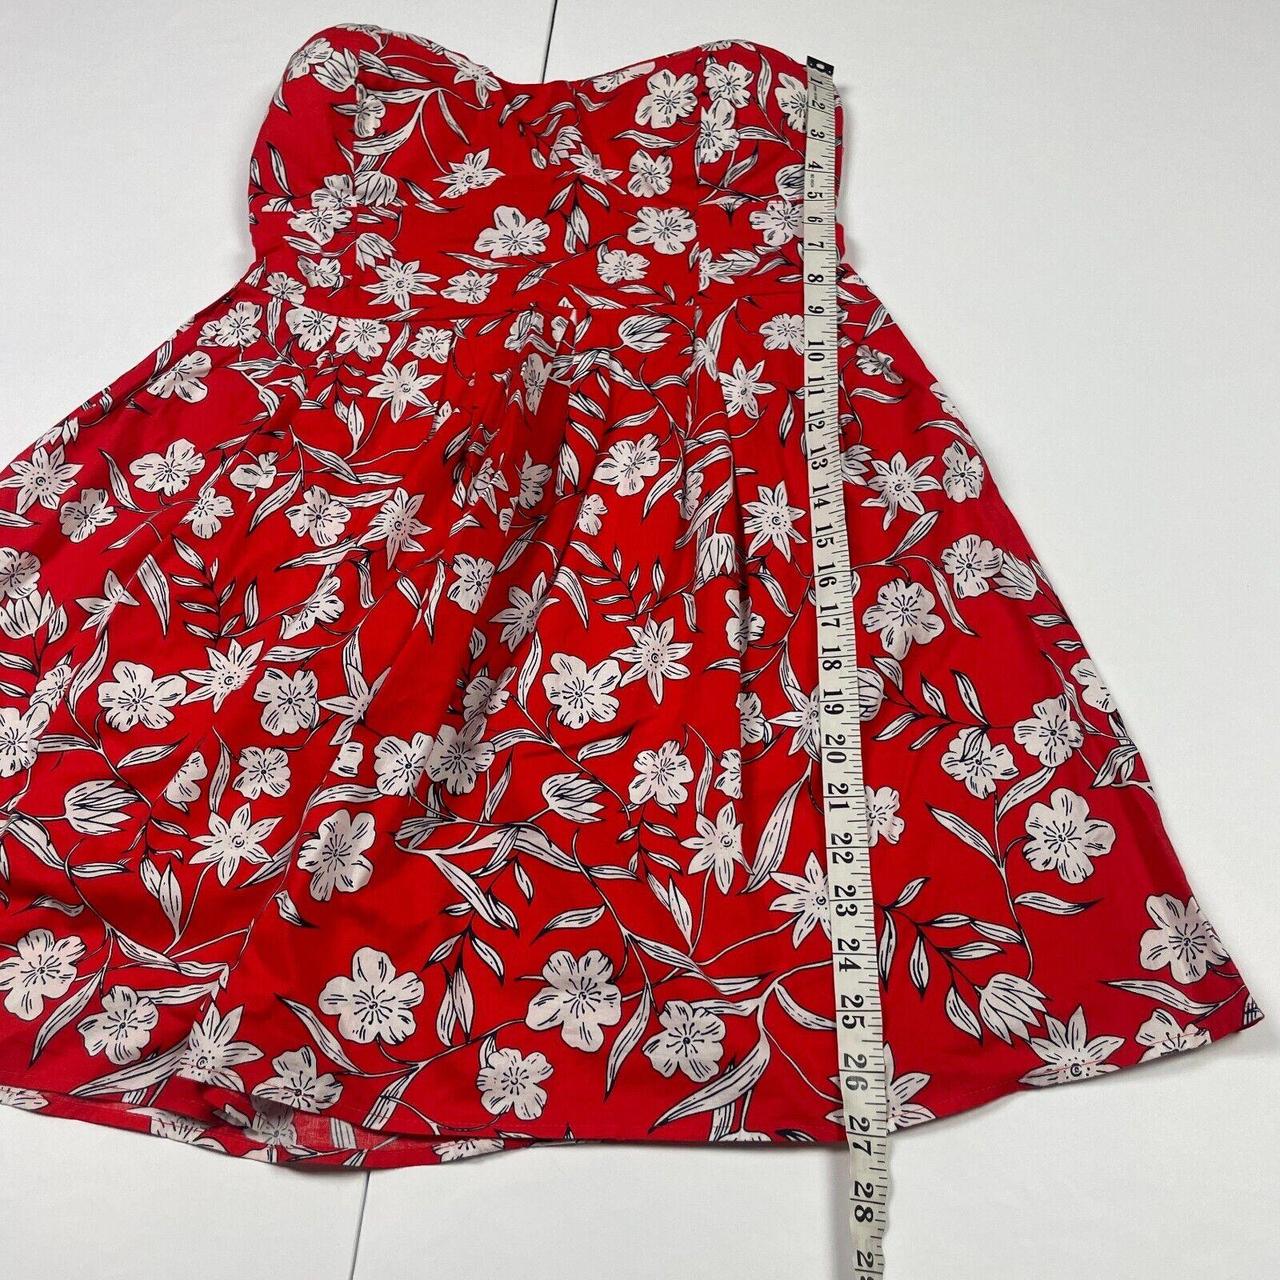 Product Image 2 - Cameo Rose Dress 14 Red